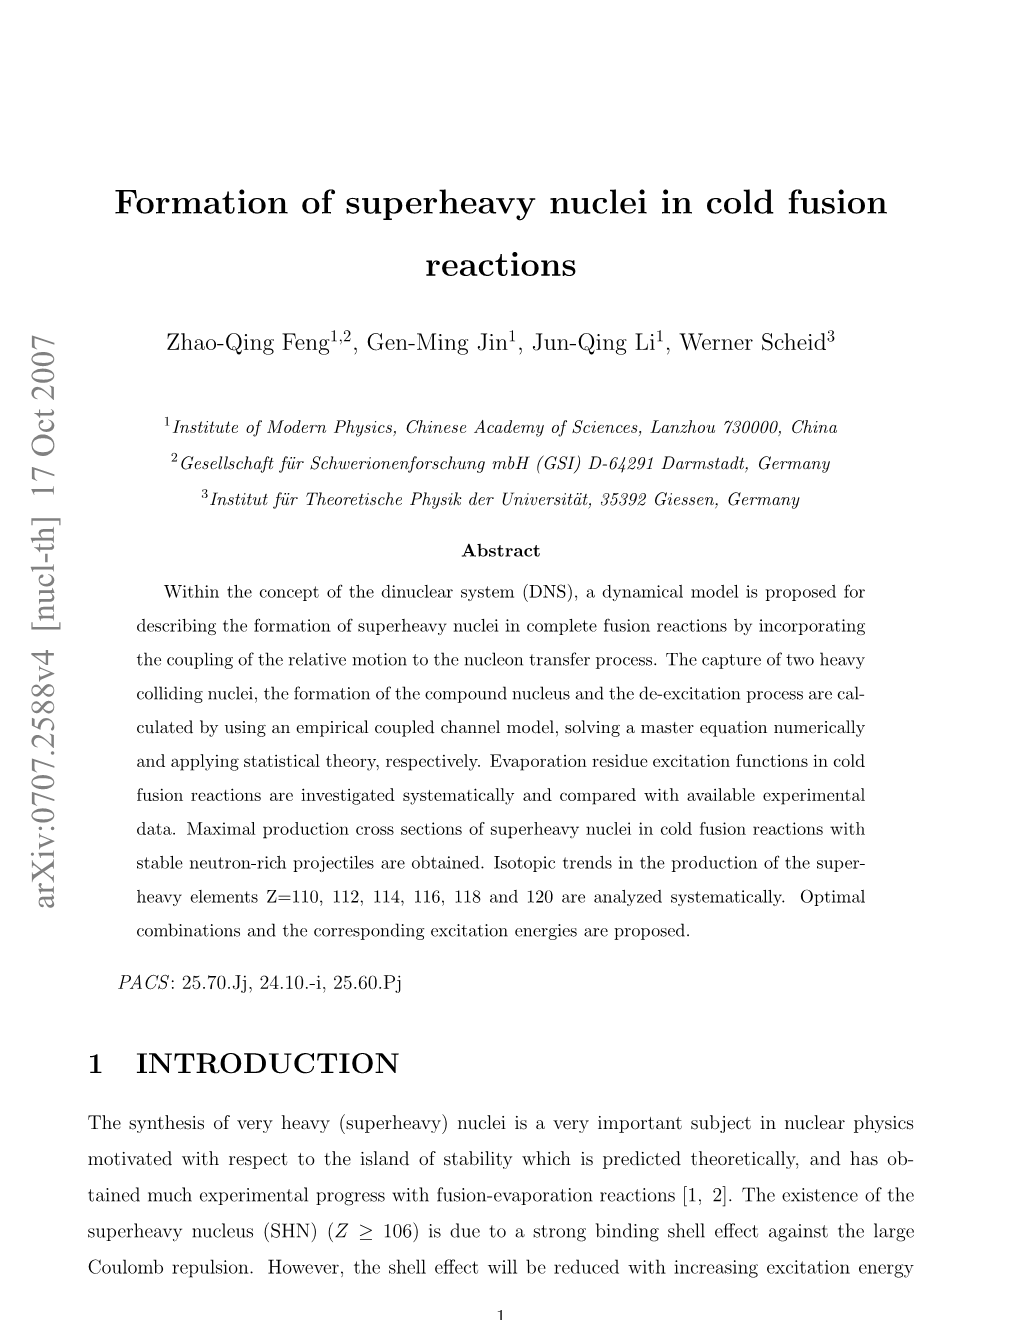 17 Oct 2007 Formation of Superheavy Nuclei in Cold Fusion Reactions